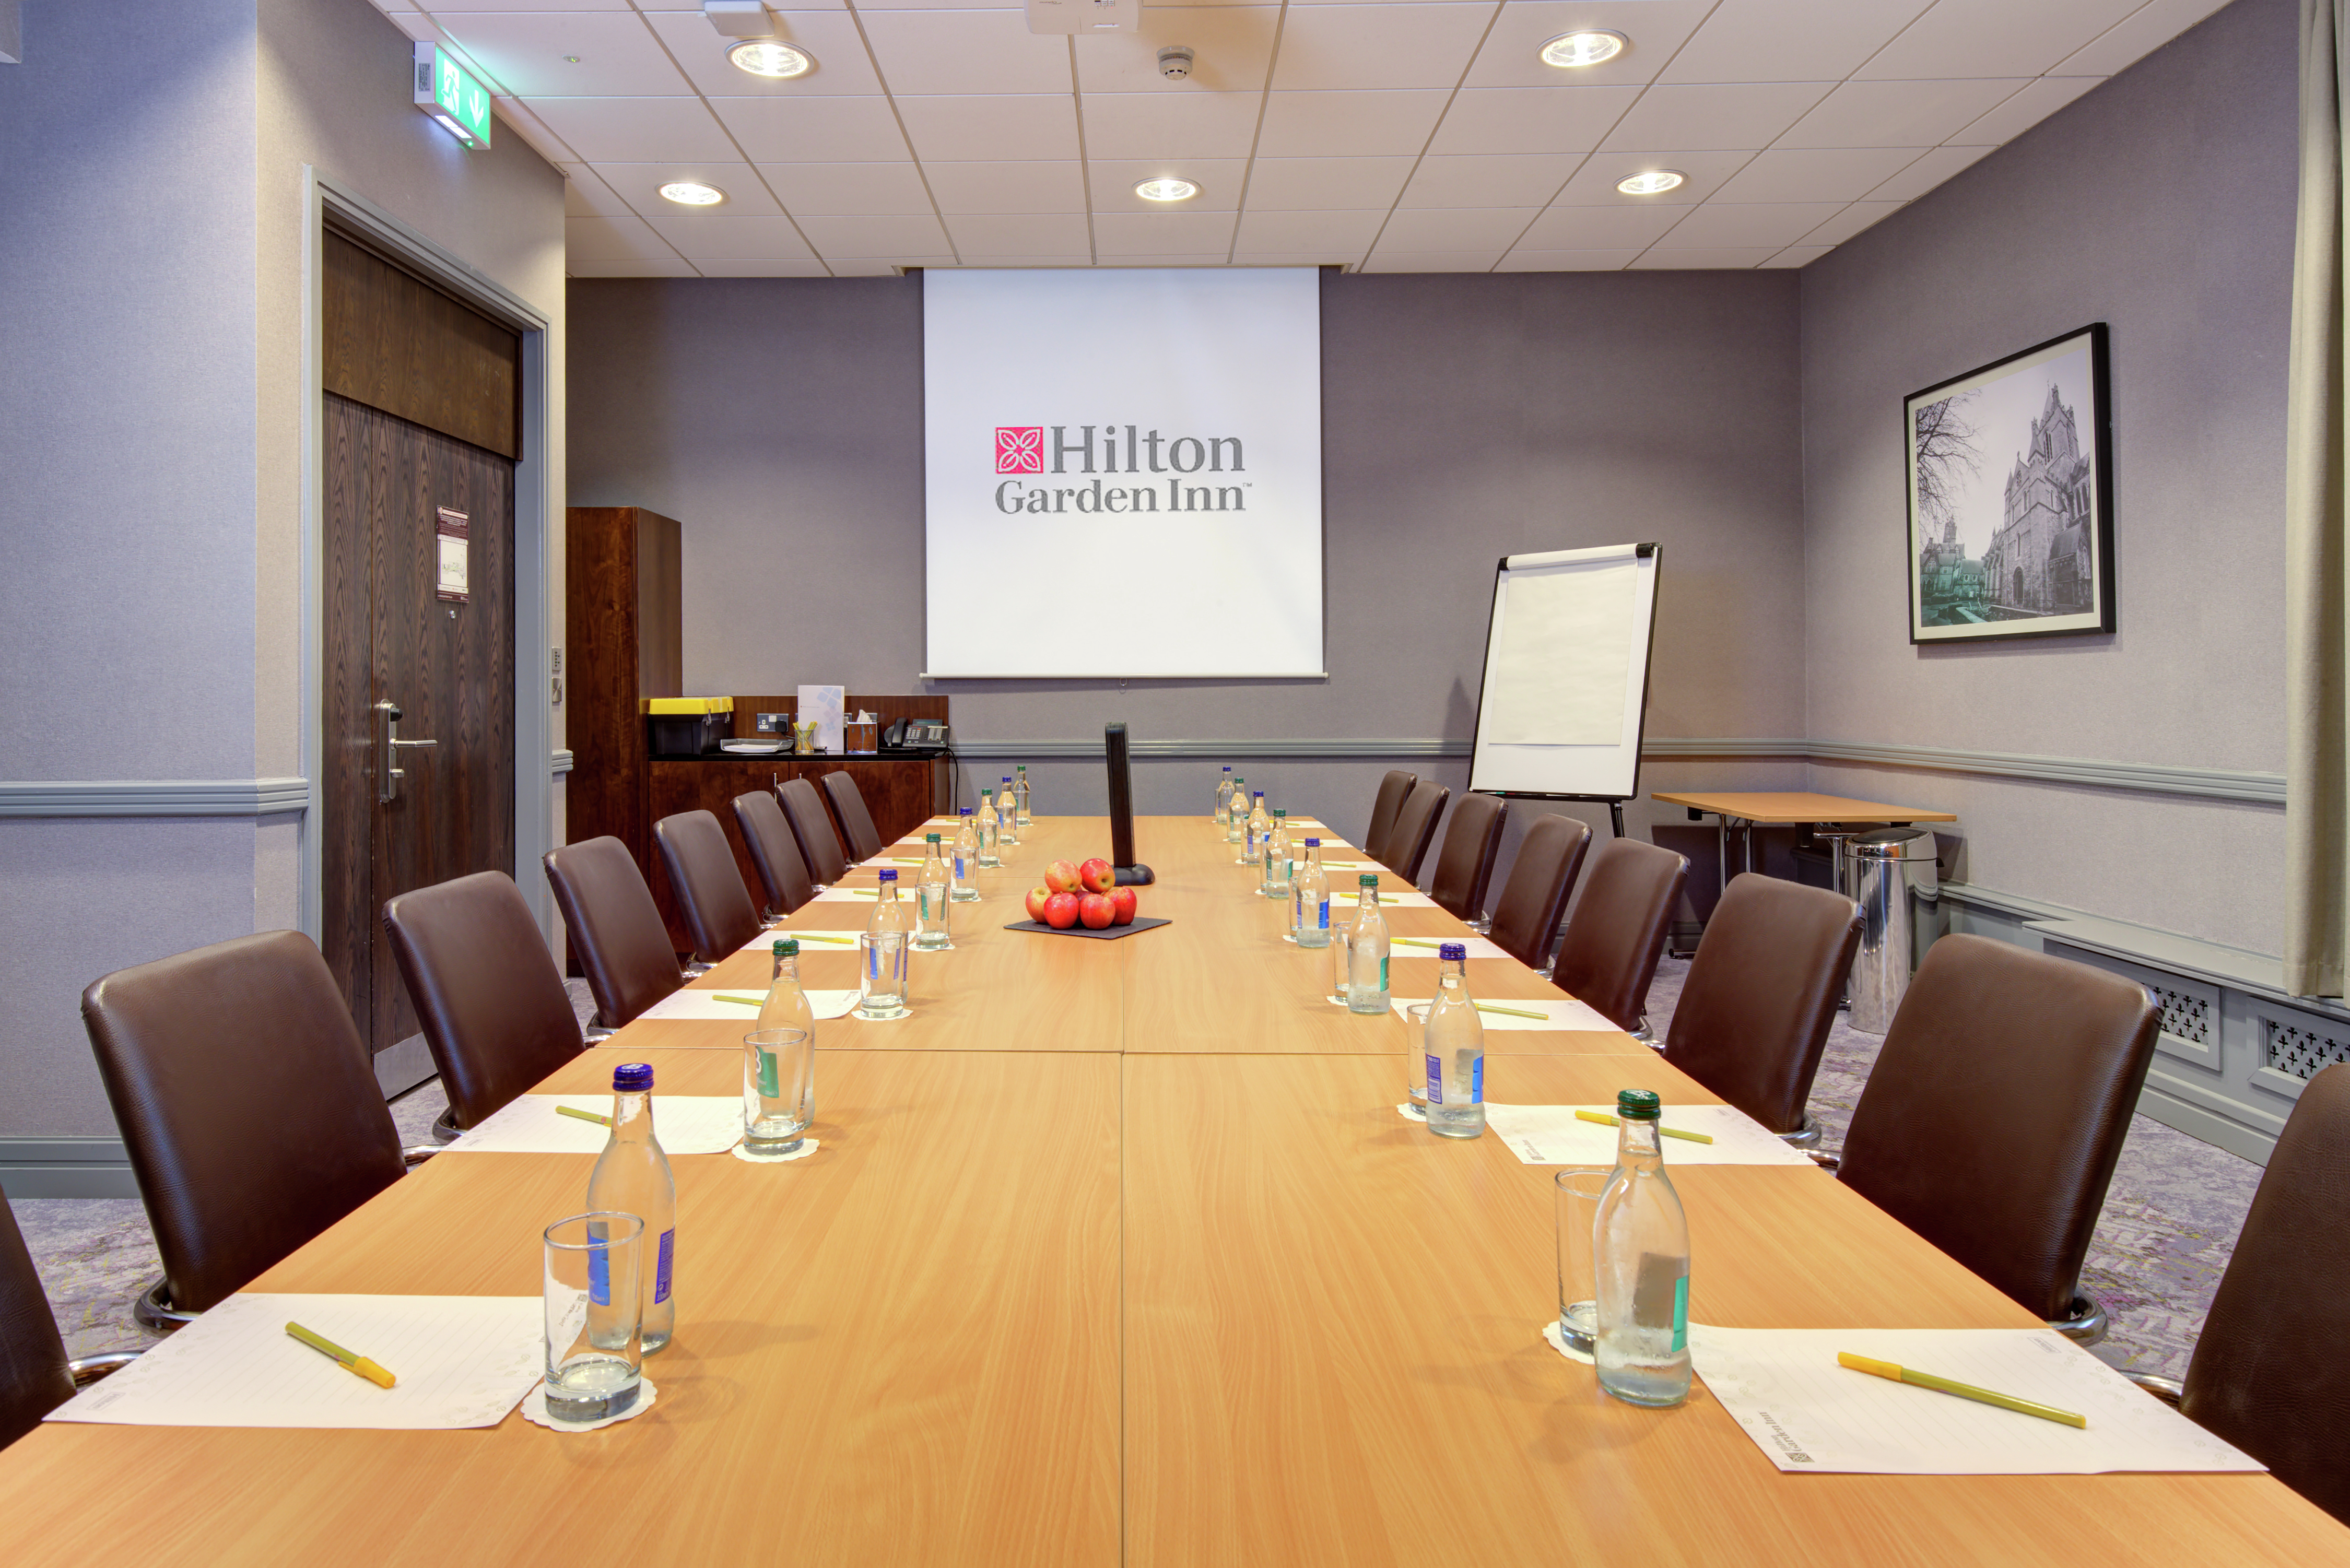 Liffey Room Boardroom with Table, Chairs, and Projector Screen